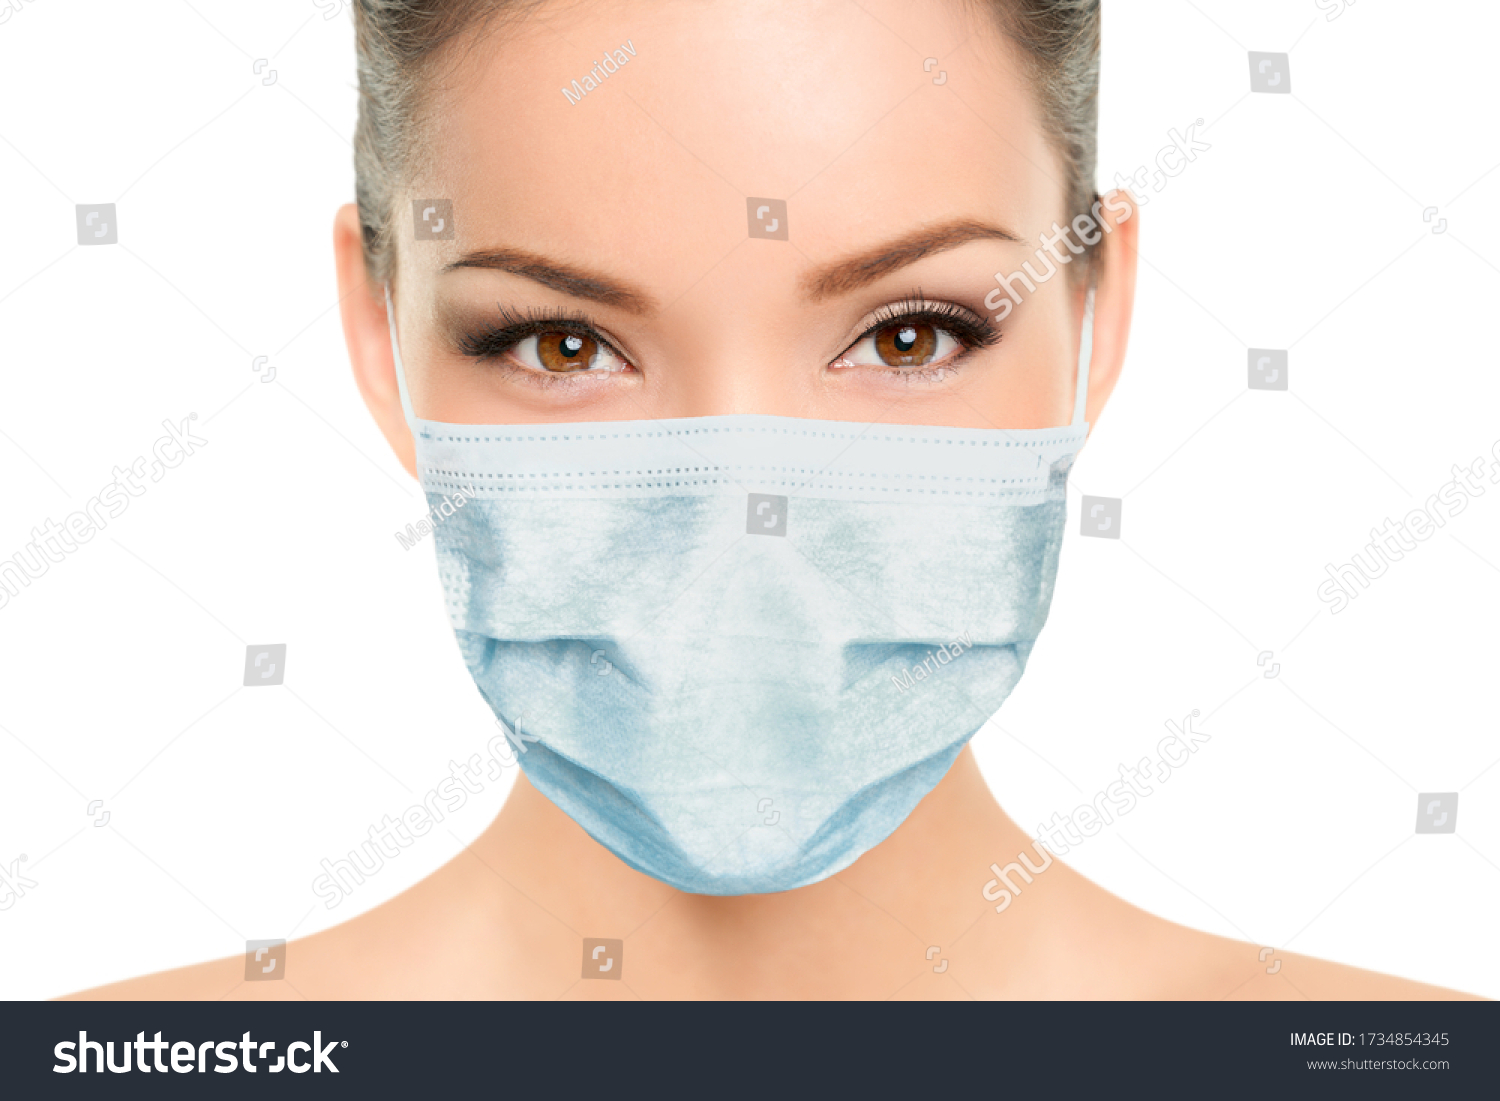 Beautiful Asian woman wearing medical face mask with eyes makeup beauty model portrait isolated on white background for Coronavirus. #1734854345